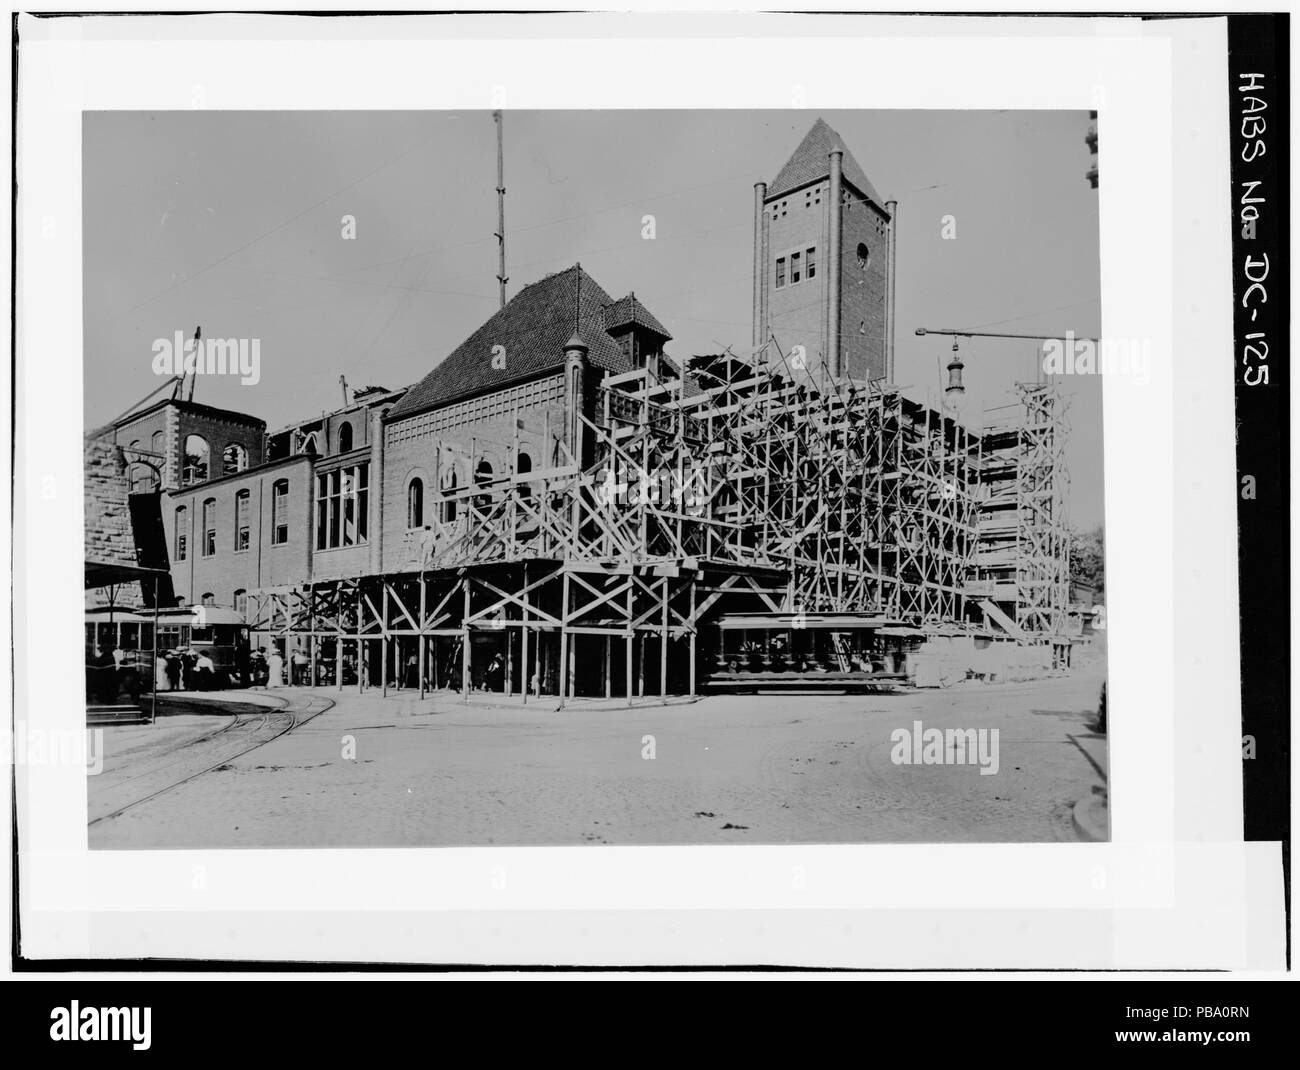 . Historic American Buildings Survey Copy of 1911 Photograph Showing Building Undergoing Alterations (from Leroy O. King's Private Collection) Georgetown - Capital Traction Company Union Station, 3600 M Street Northwest, Washington, District of Columbia, DC 761 Historic American Buildings Survey Copy of 1911 Photograph Showing Building Undergoing Alterations (from Leroy O. King's Private Collection) Georgetown - Capital Traction Company HABS DC,GEO,84-12 Stock Photo